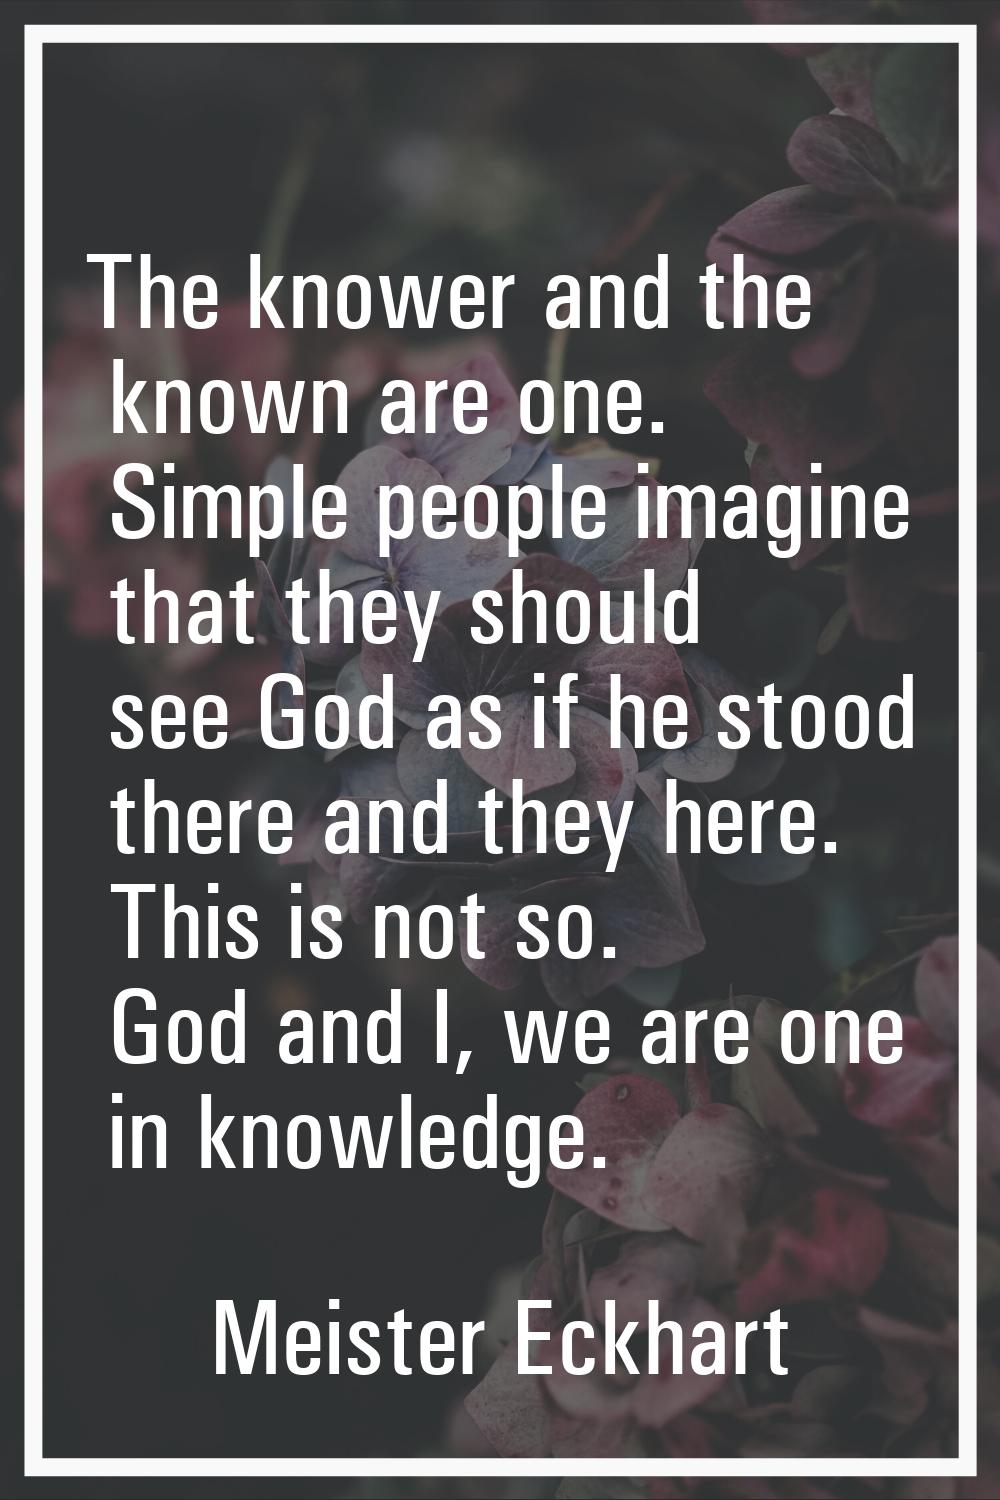 The knower and the known are one. Simple people imagine that they should see God as if he stood the